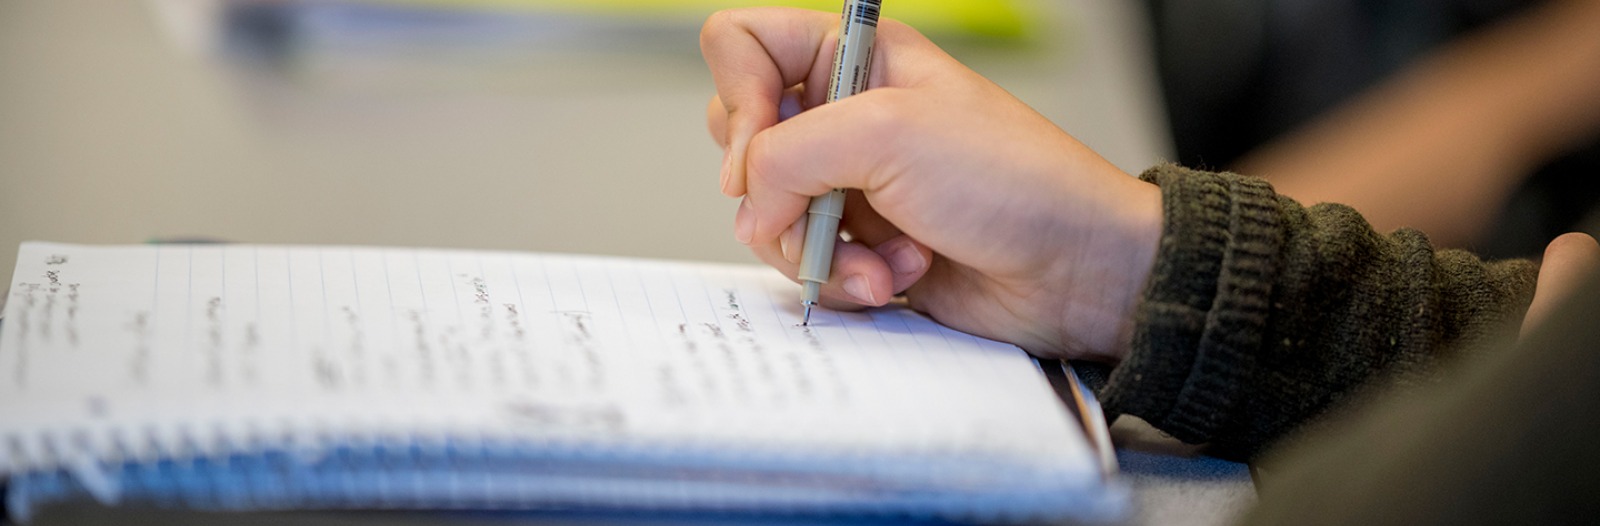 Close-up of a student writing in a notebook